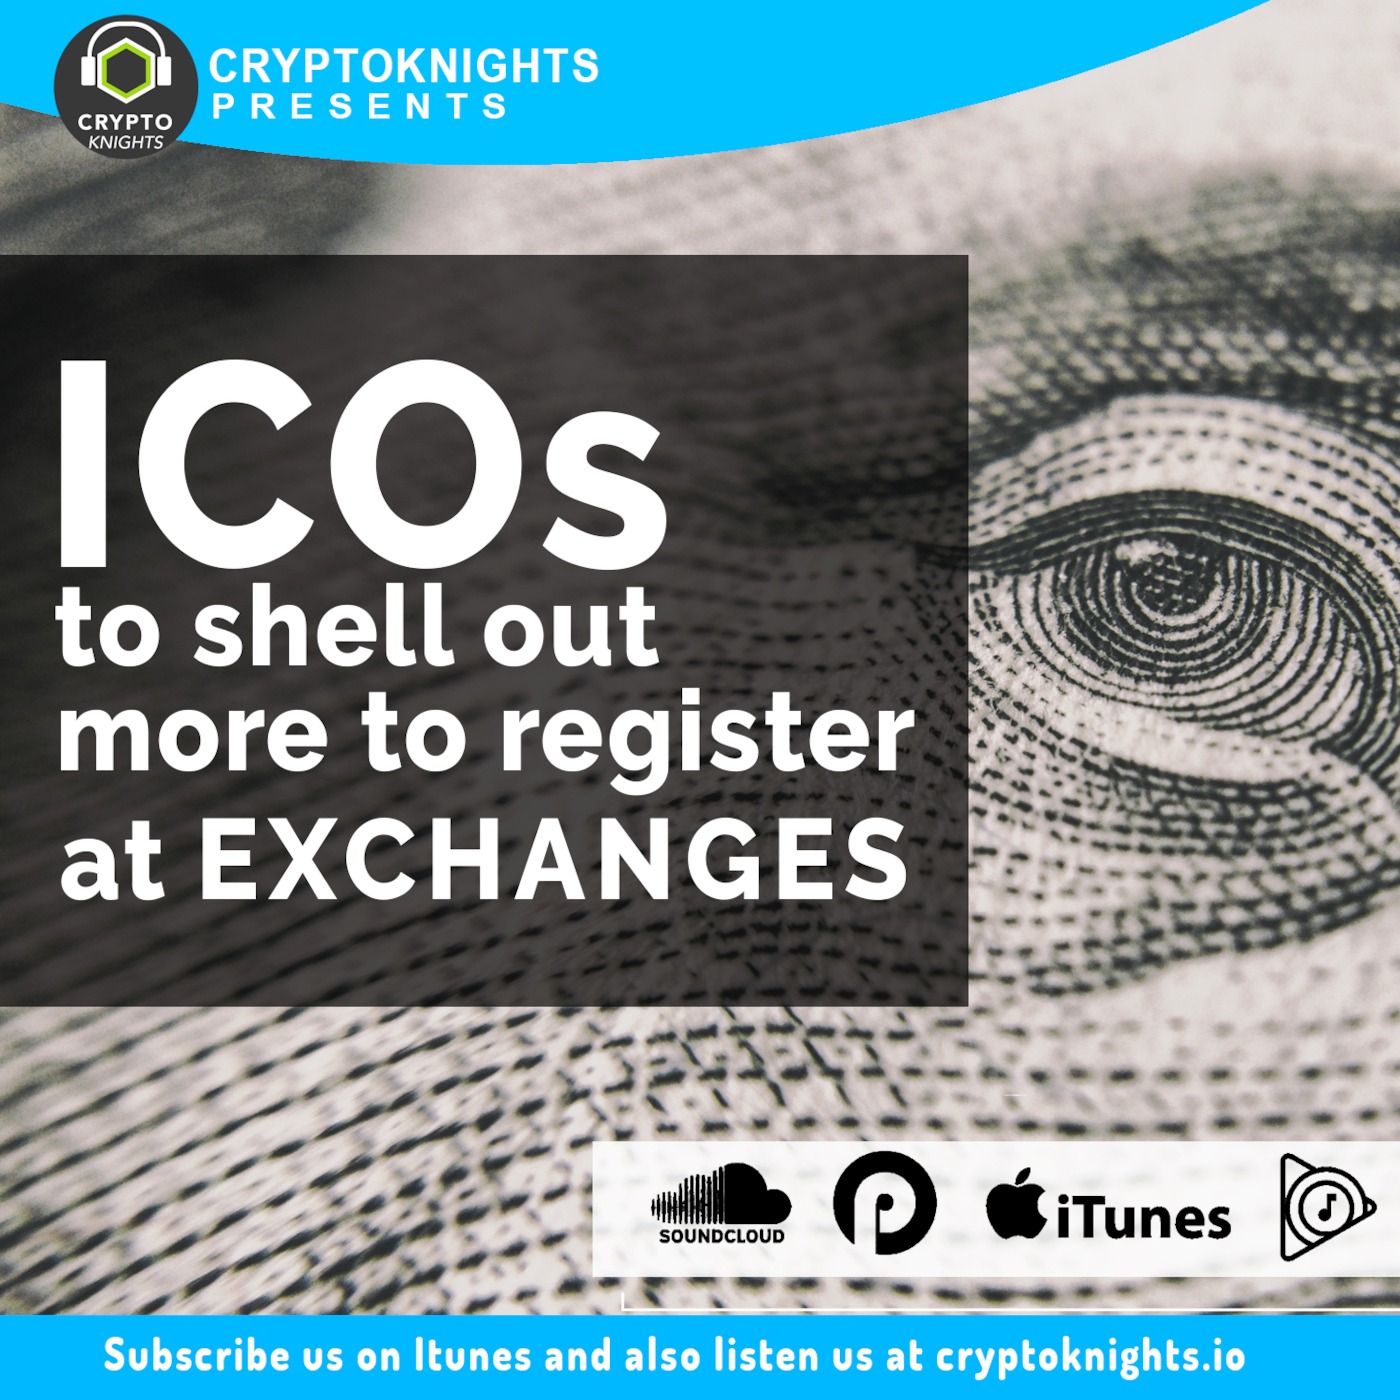 ICOs to Start Shelling Out More To Register at Exchanges